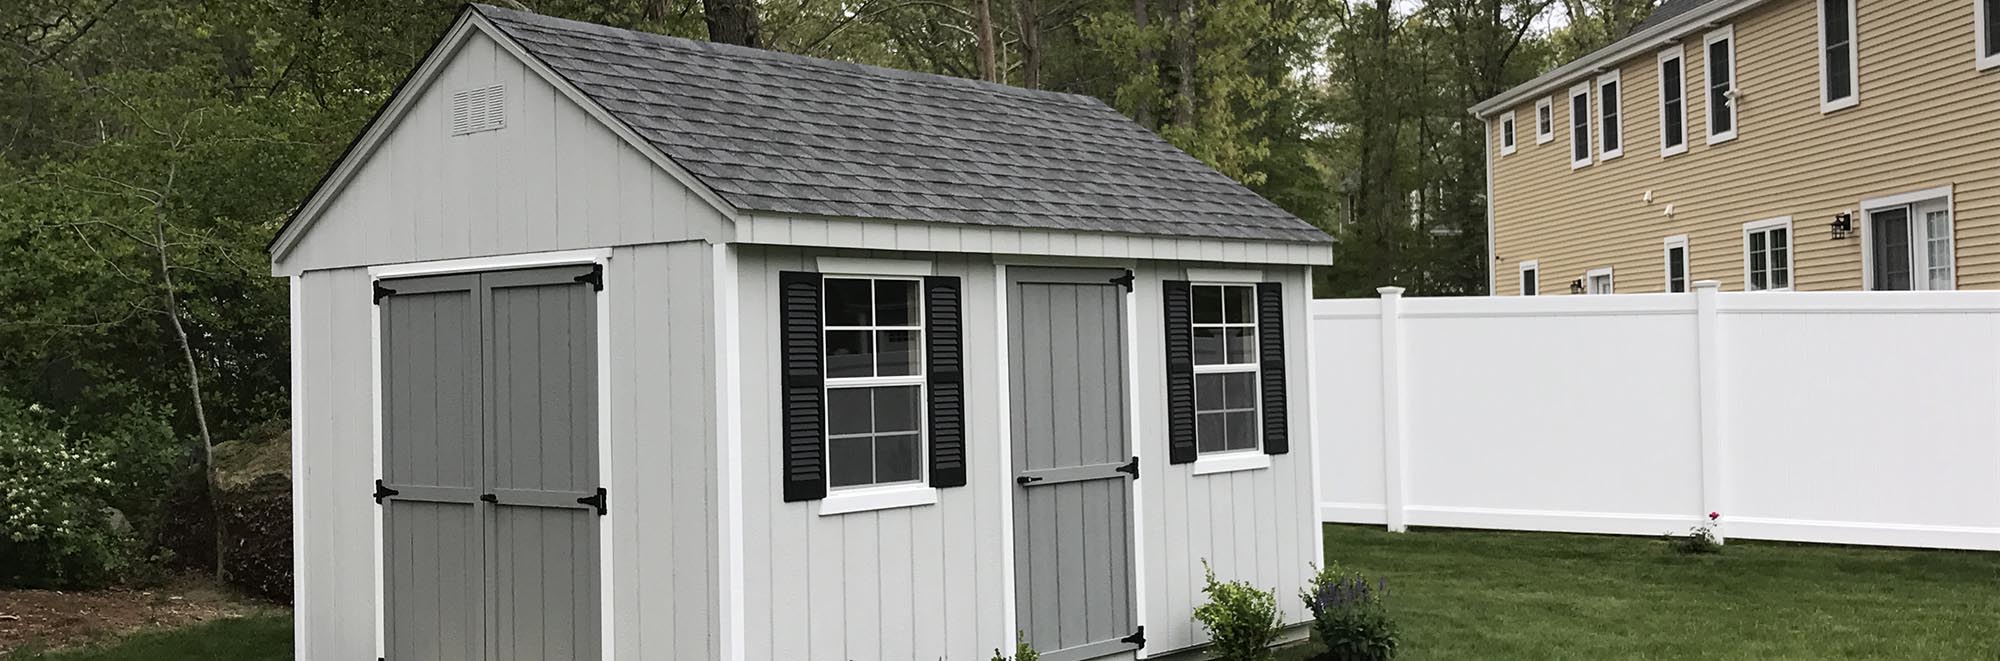 Grey Shed with Black Accents